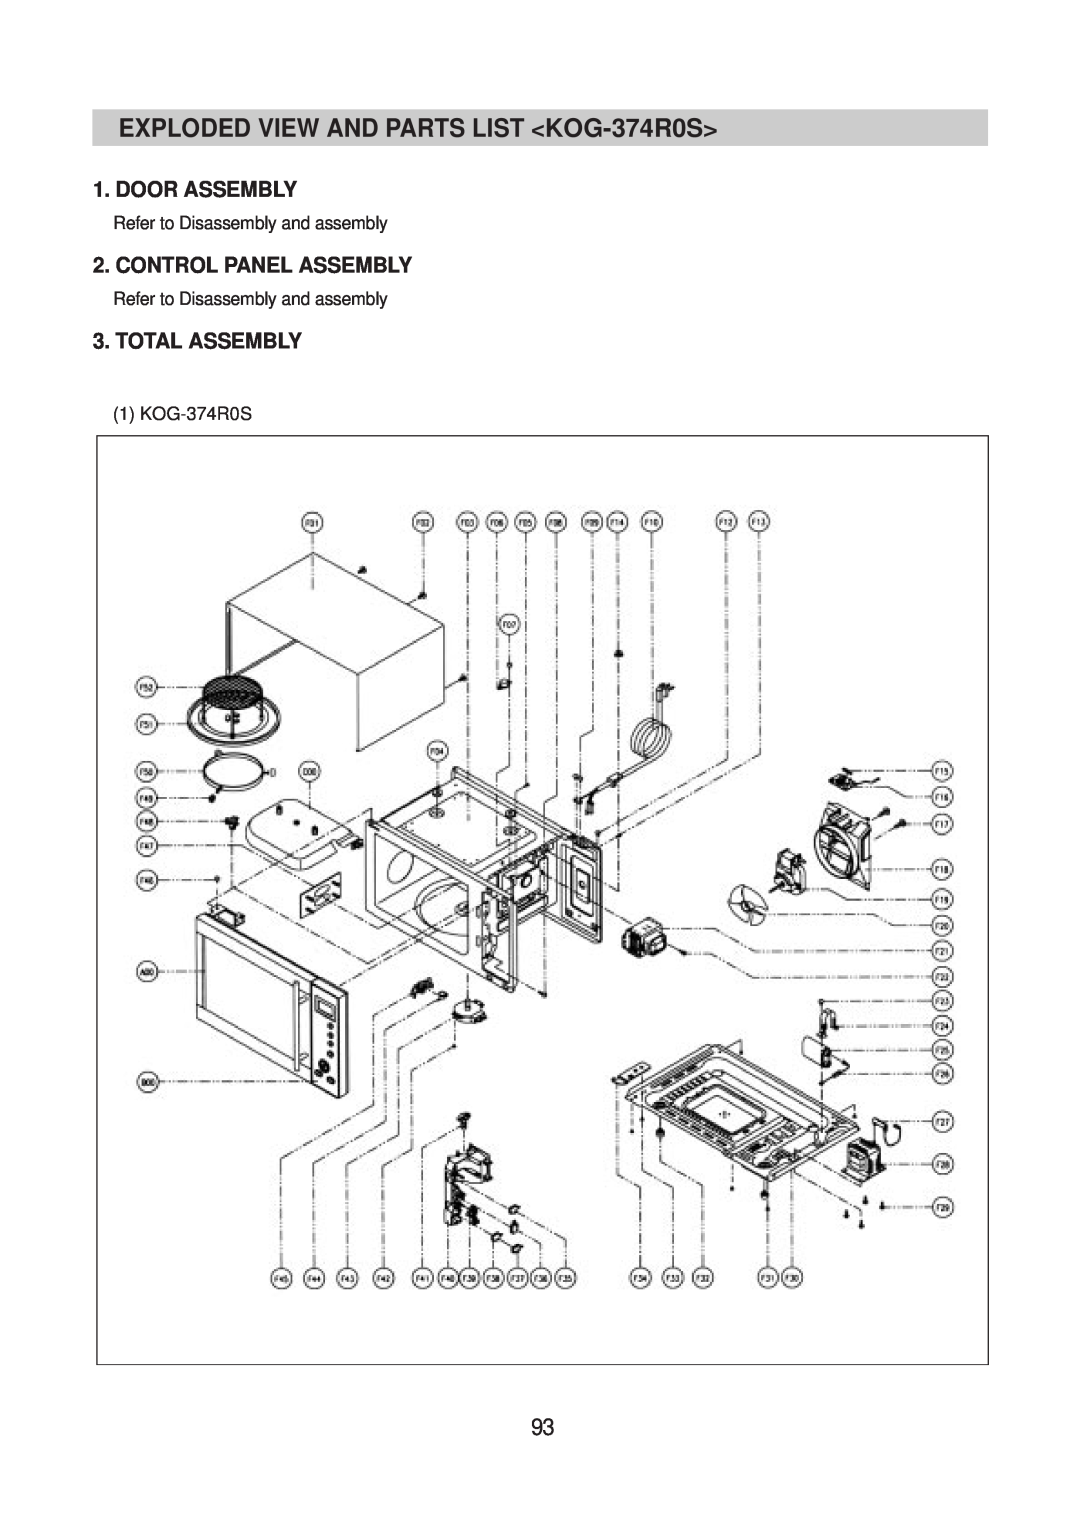 Daewoo KOG-393R0S EXPLODED VIEW AND PARTS LIST KOG-374R0S, Door Assembly, Control Panel Assembly, Total Assembly 